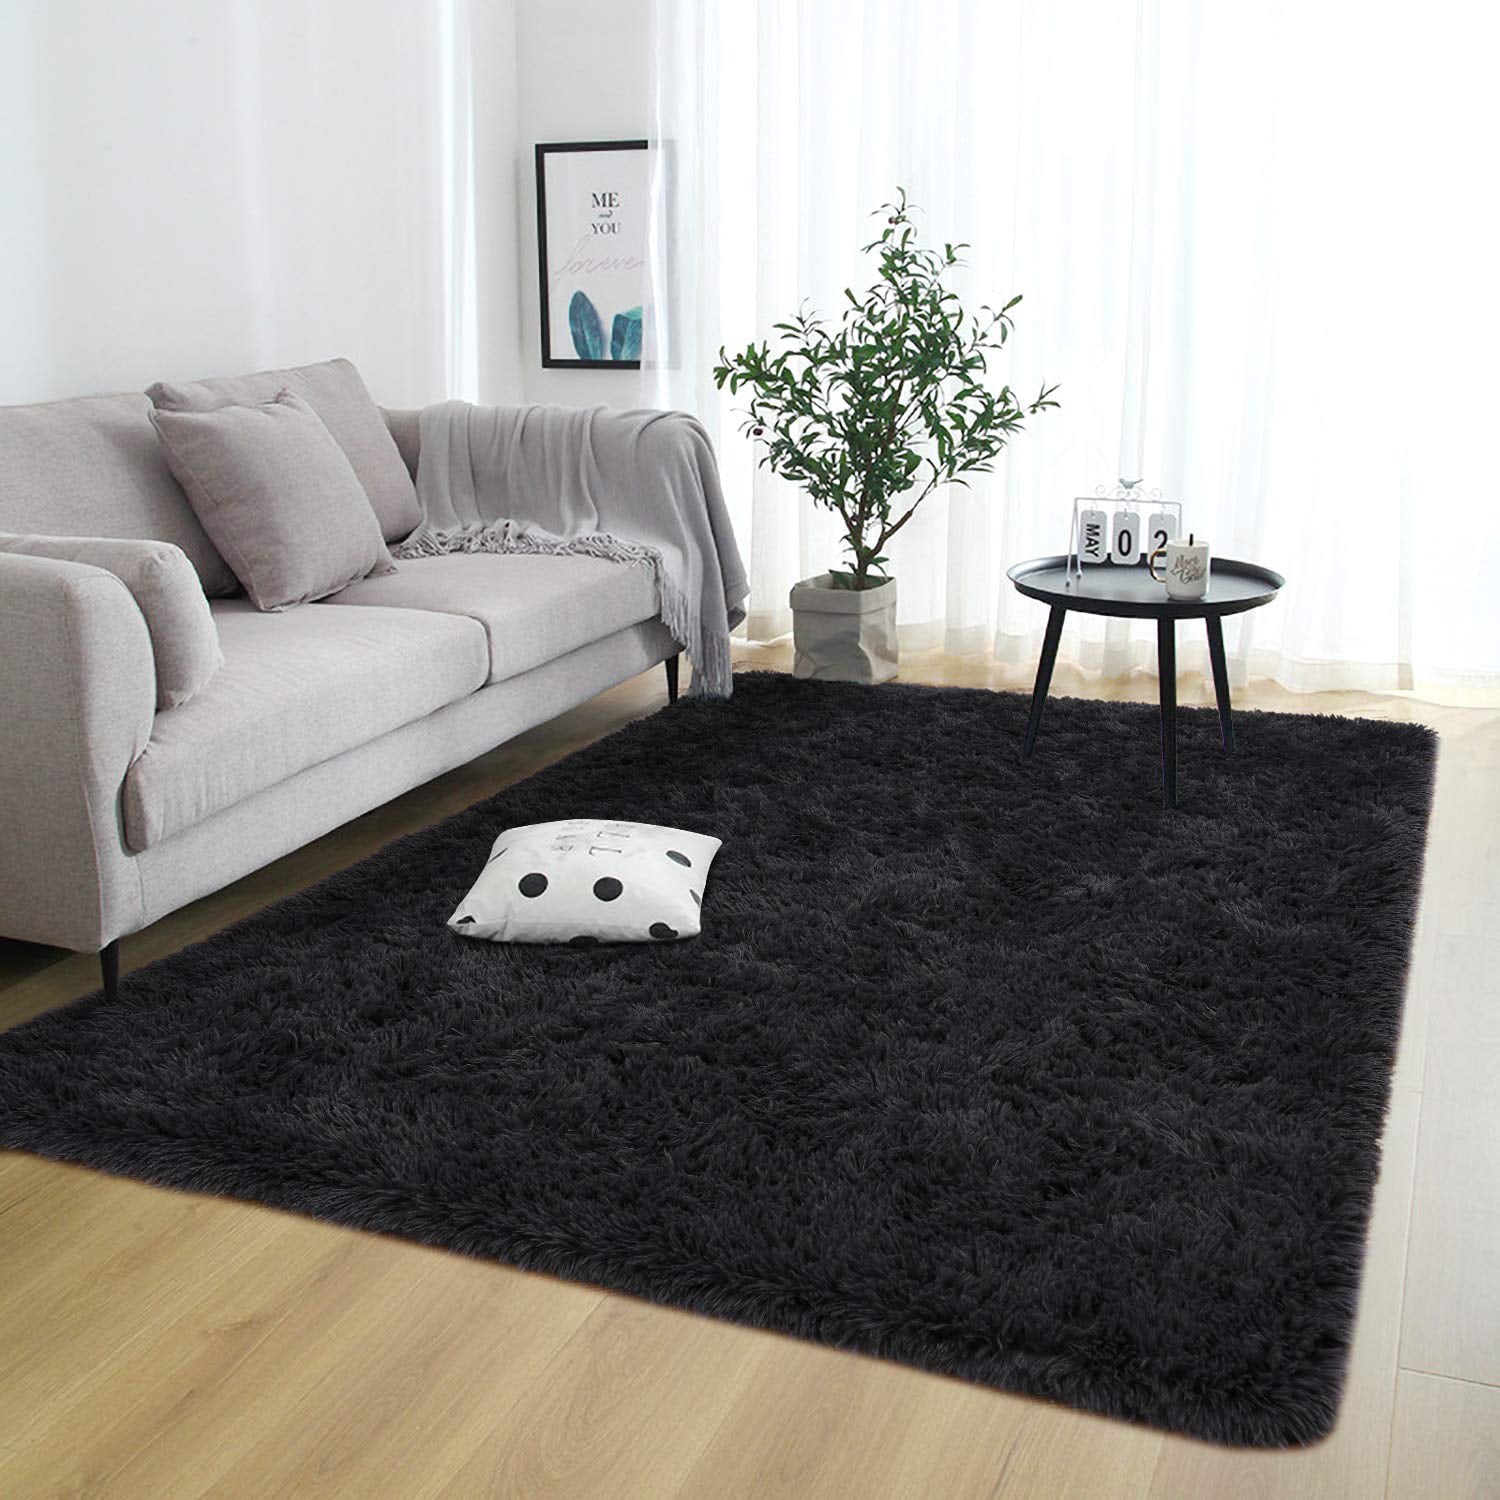 Rostyle Super Soft Fluffy Area Rugs For, Black And Rug Living Room